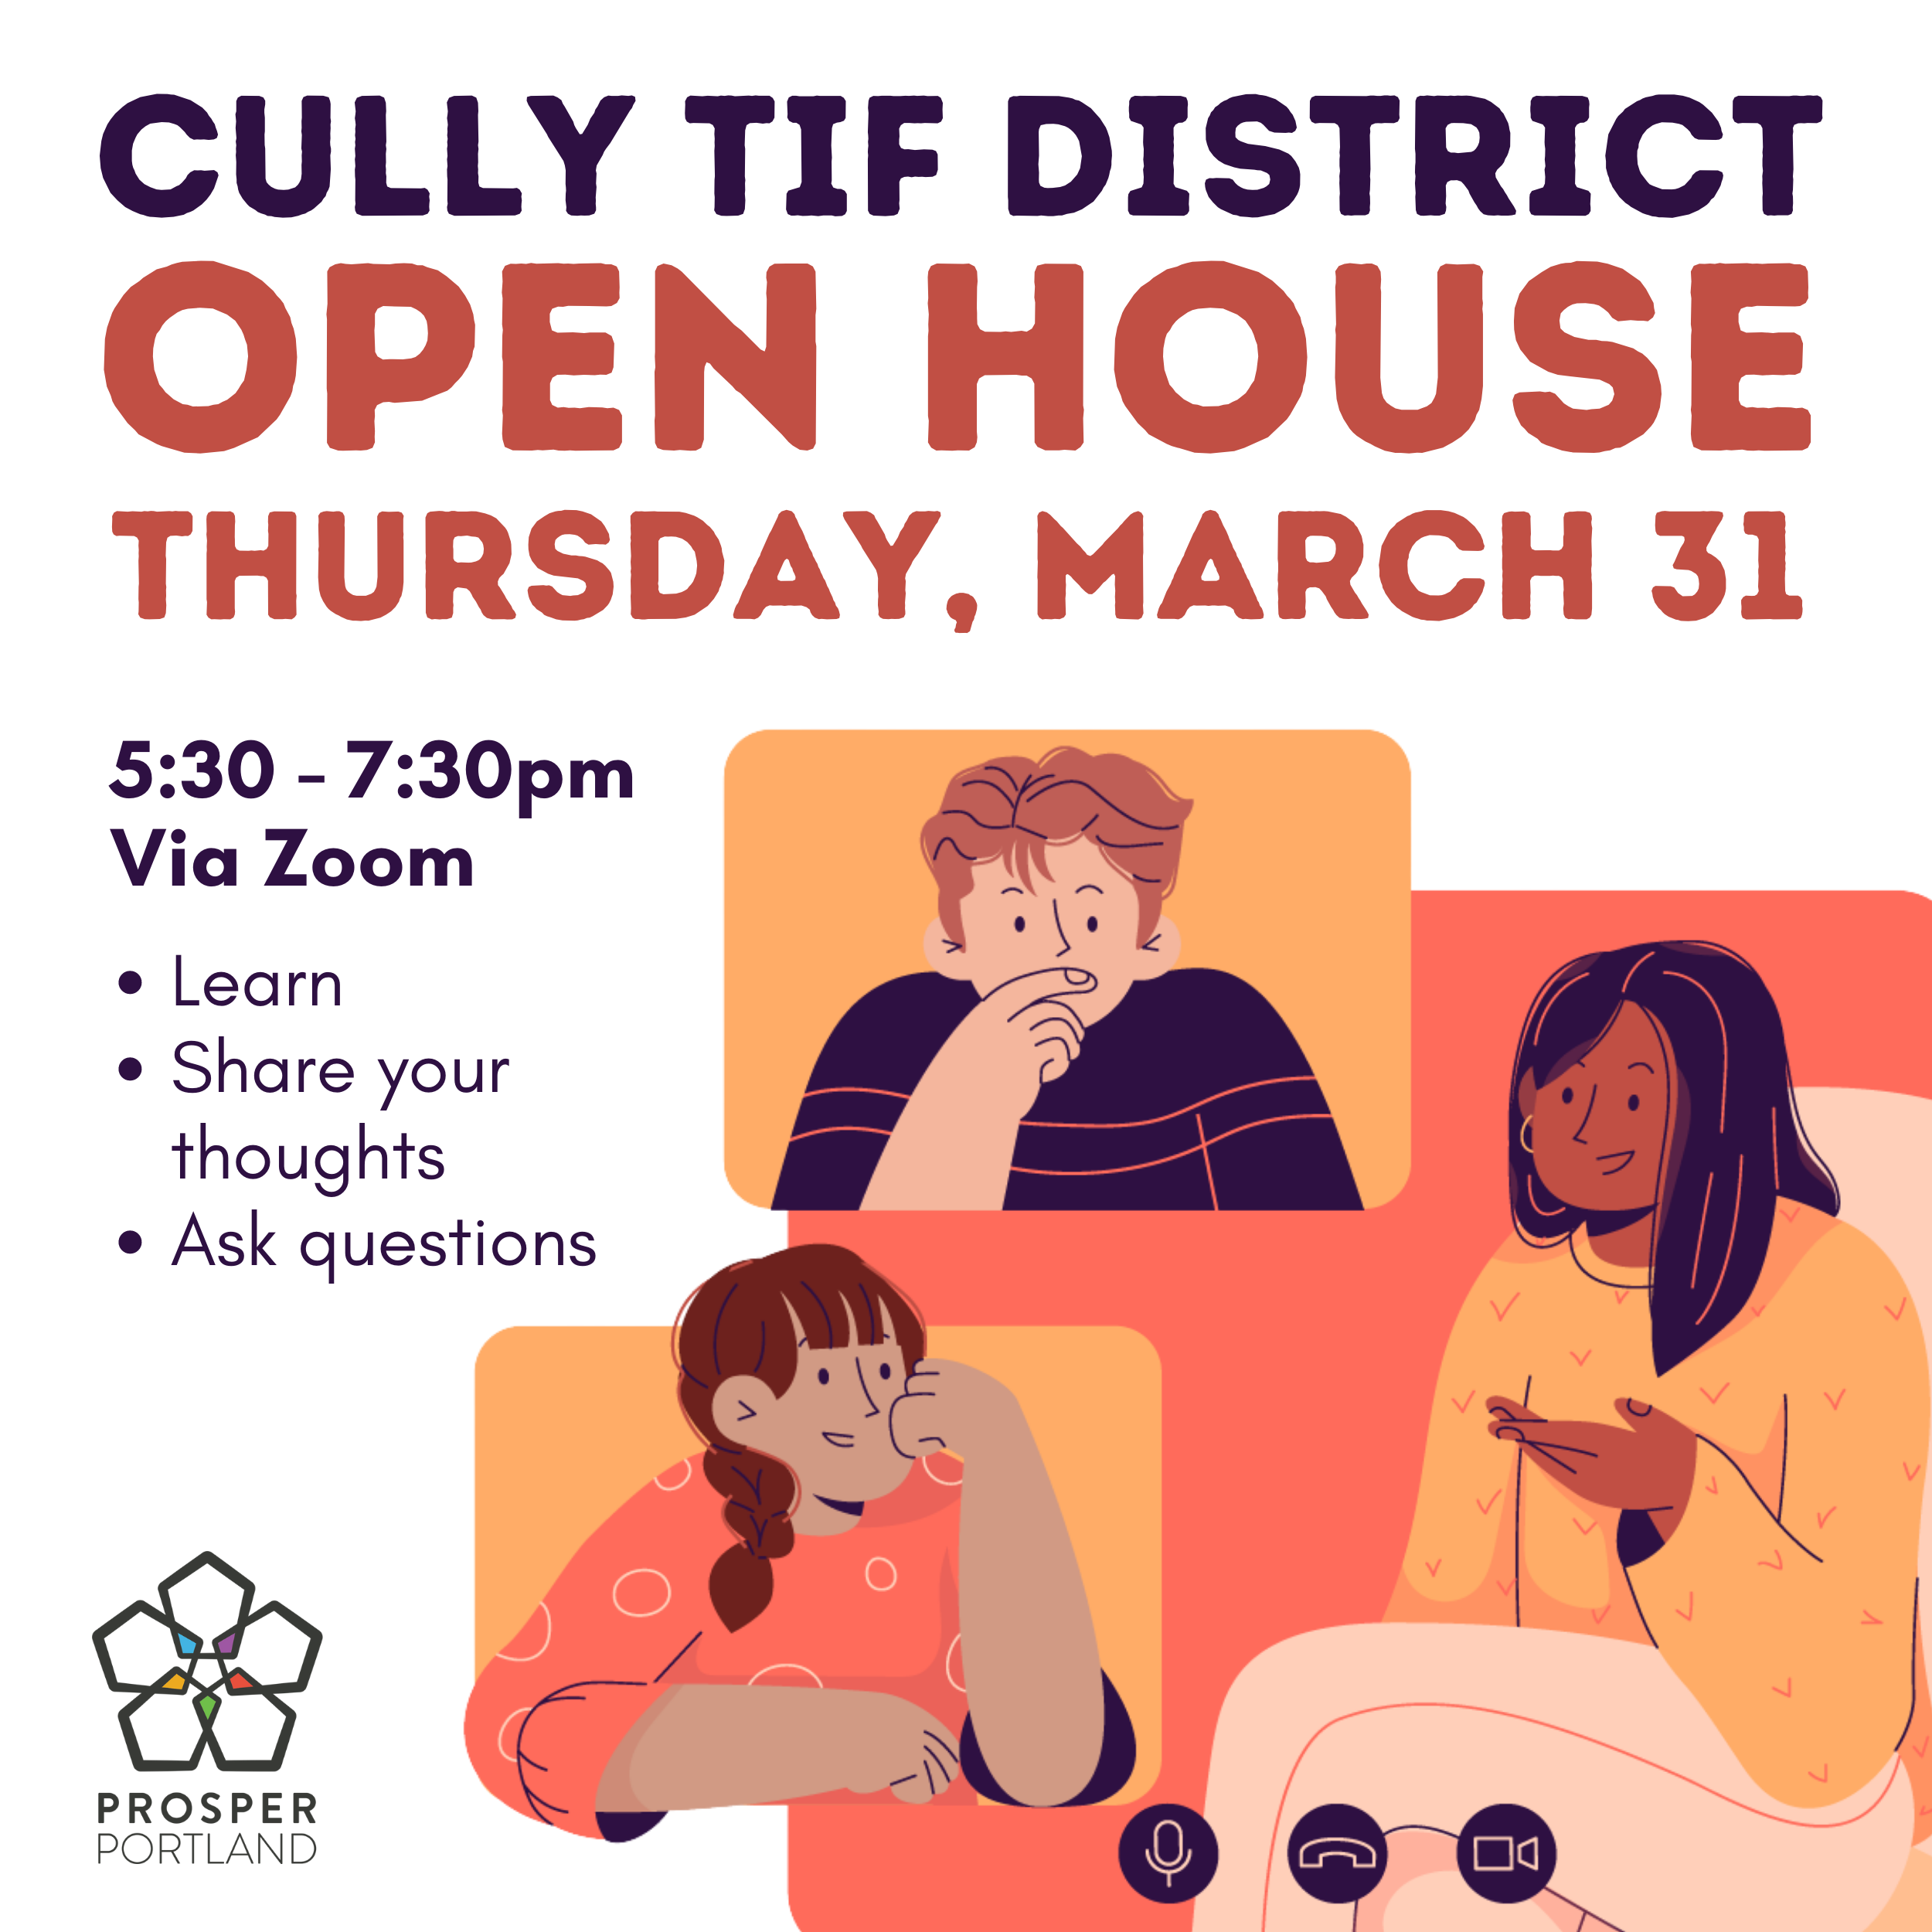 Cully TIF District Open House